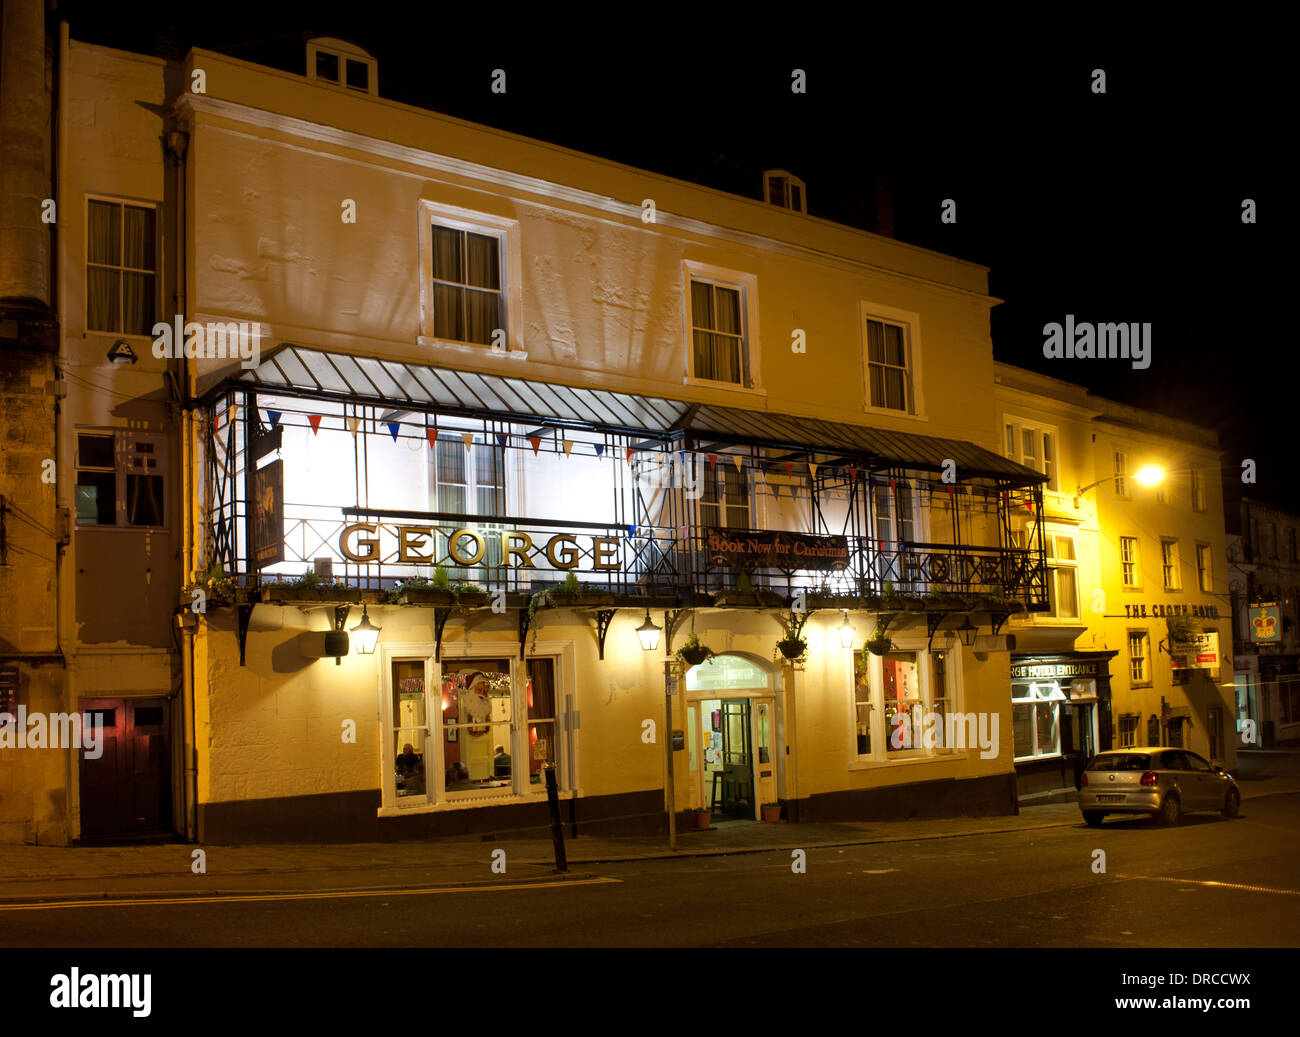 The George Hotel, Public House, Market Square, Frome, Somerset, England, UK. Stock Photo